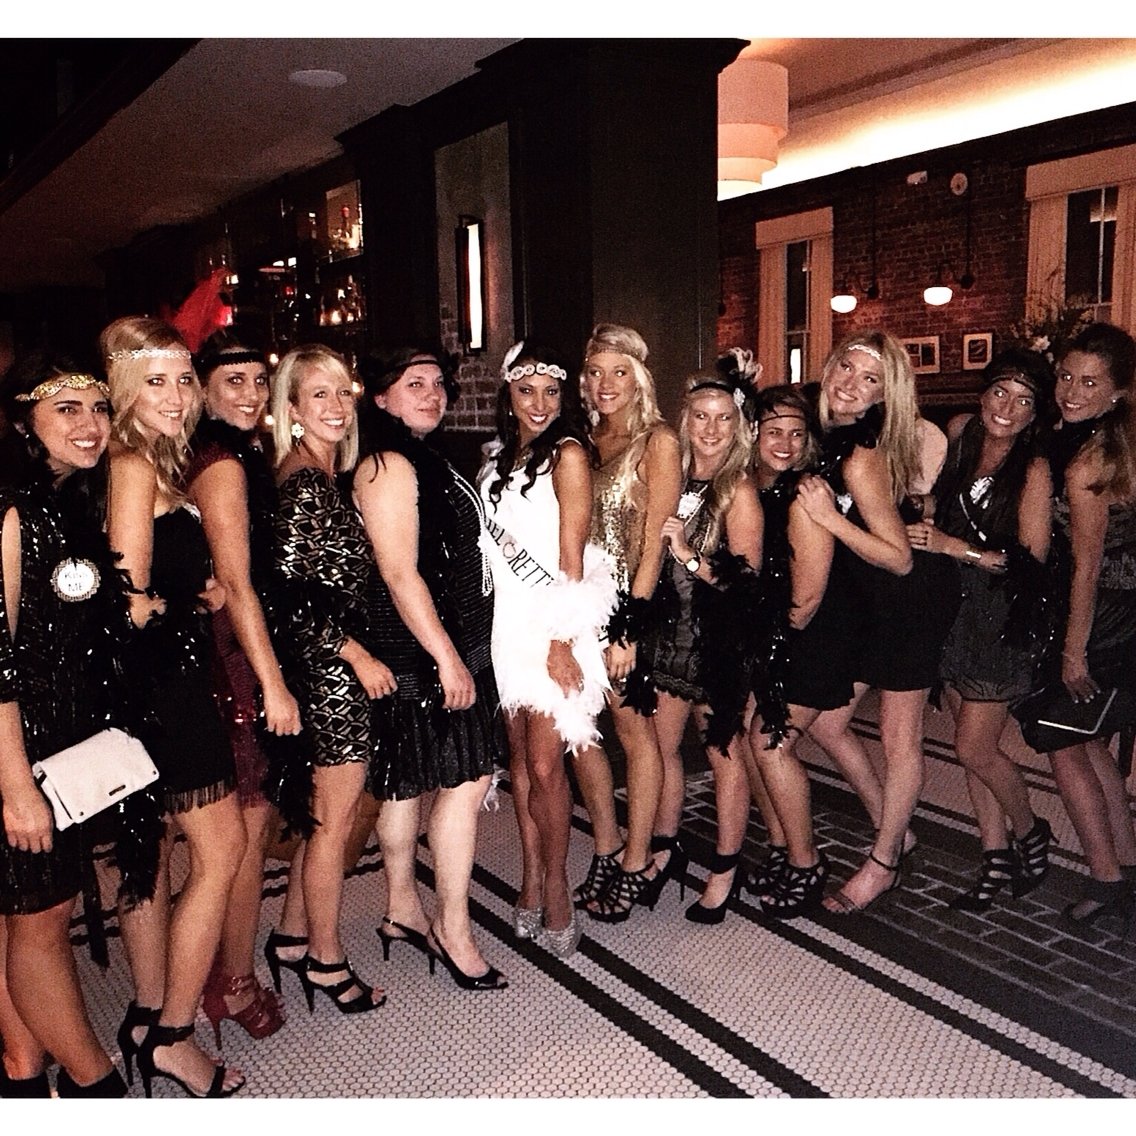 10 Most Recommended Bachelorette Party Ideas Los Angeles great gatsby bachelorette party charleston south carolina 2022